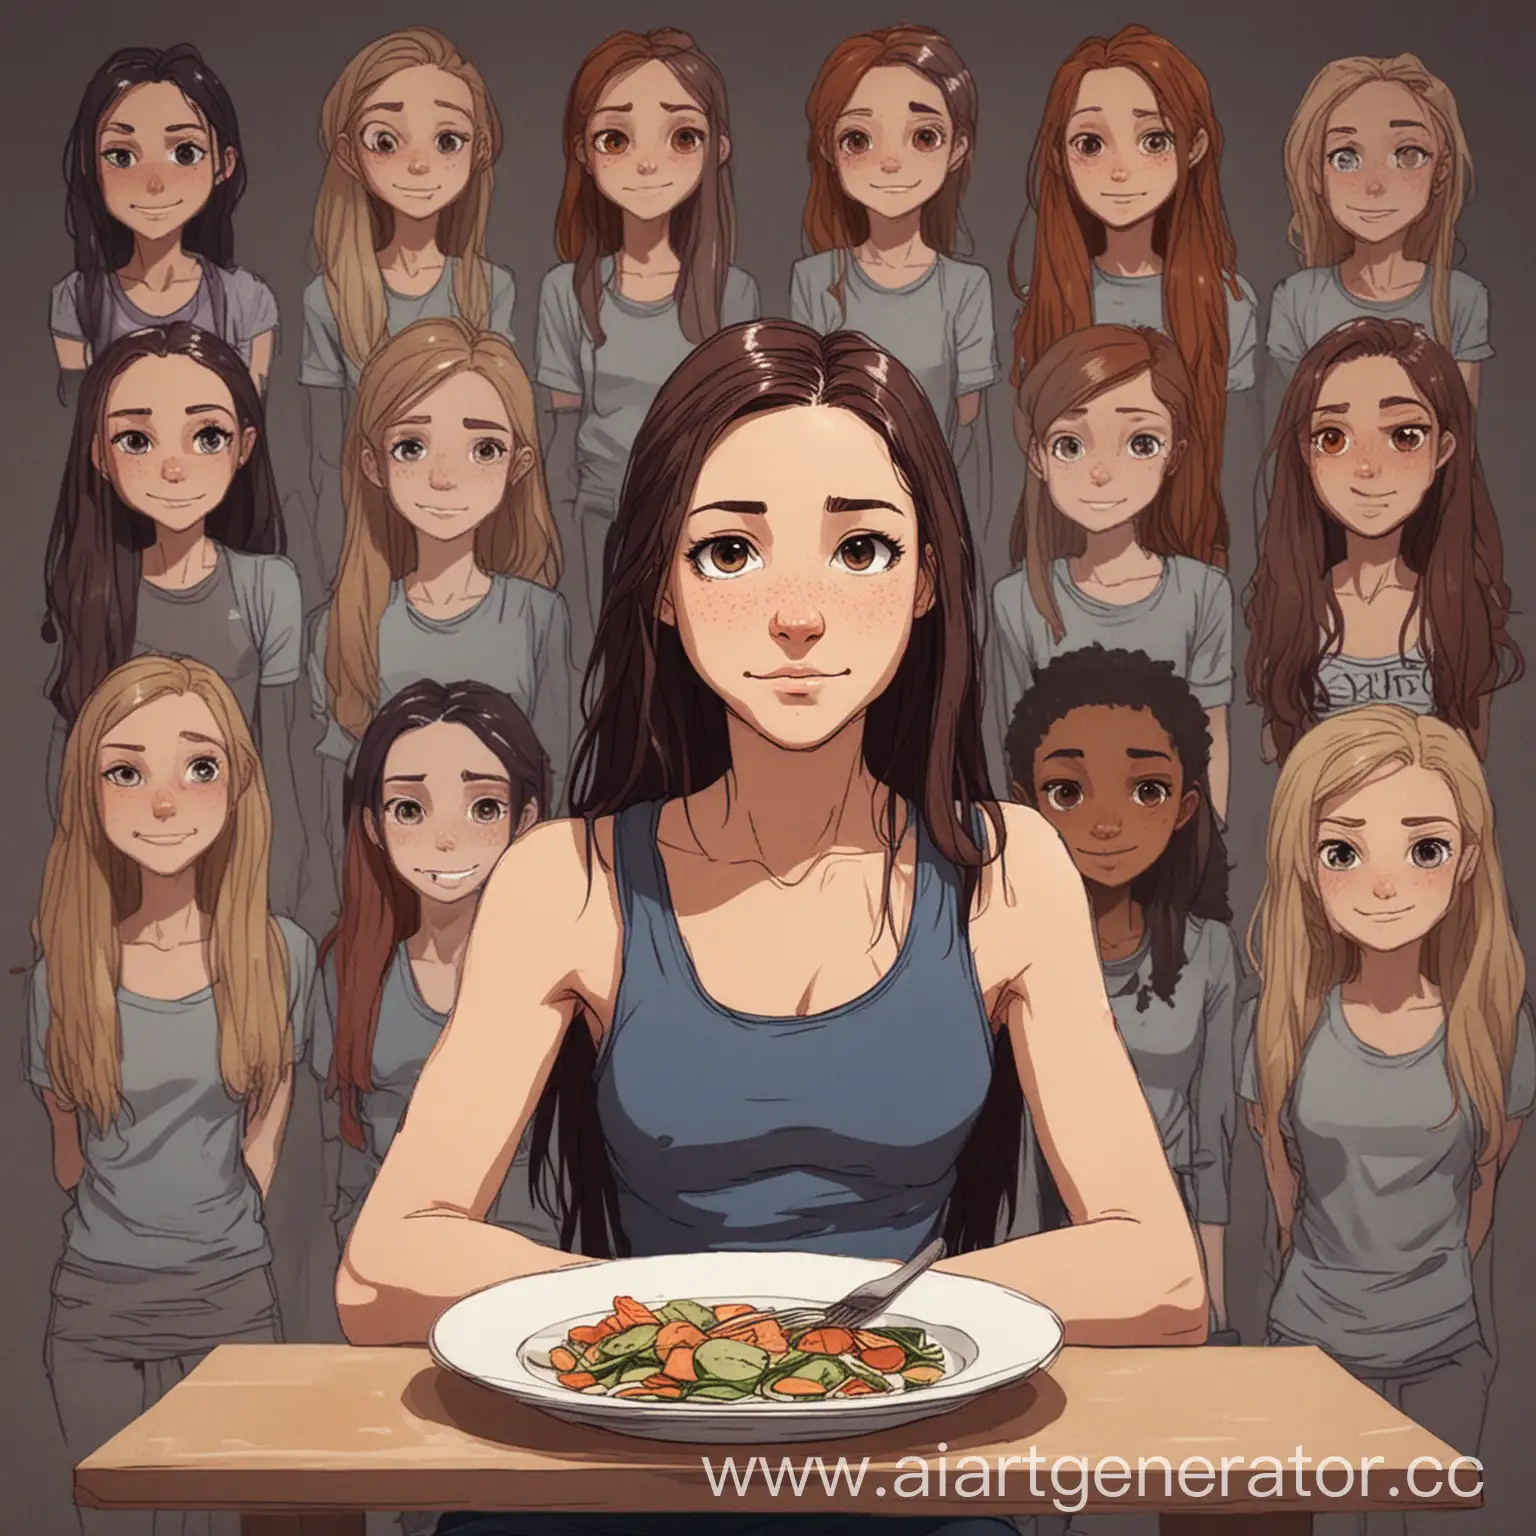 Group-Avatar-Inspiring-SelfConfidence-and-Future-Amid-Struggle-with-Eating-Disorder